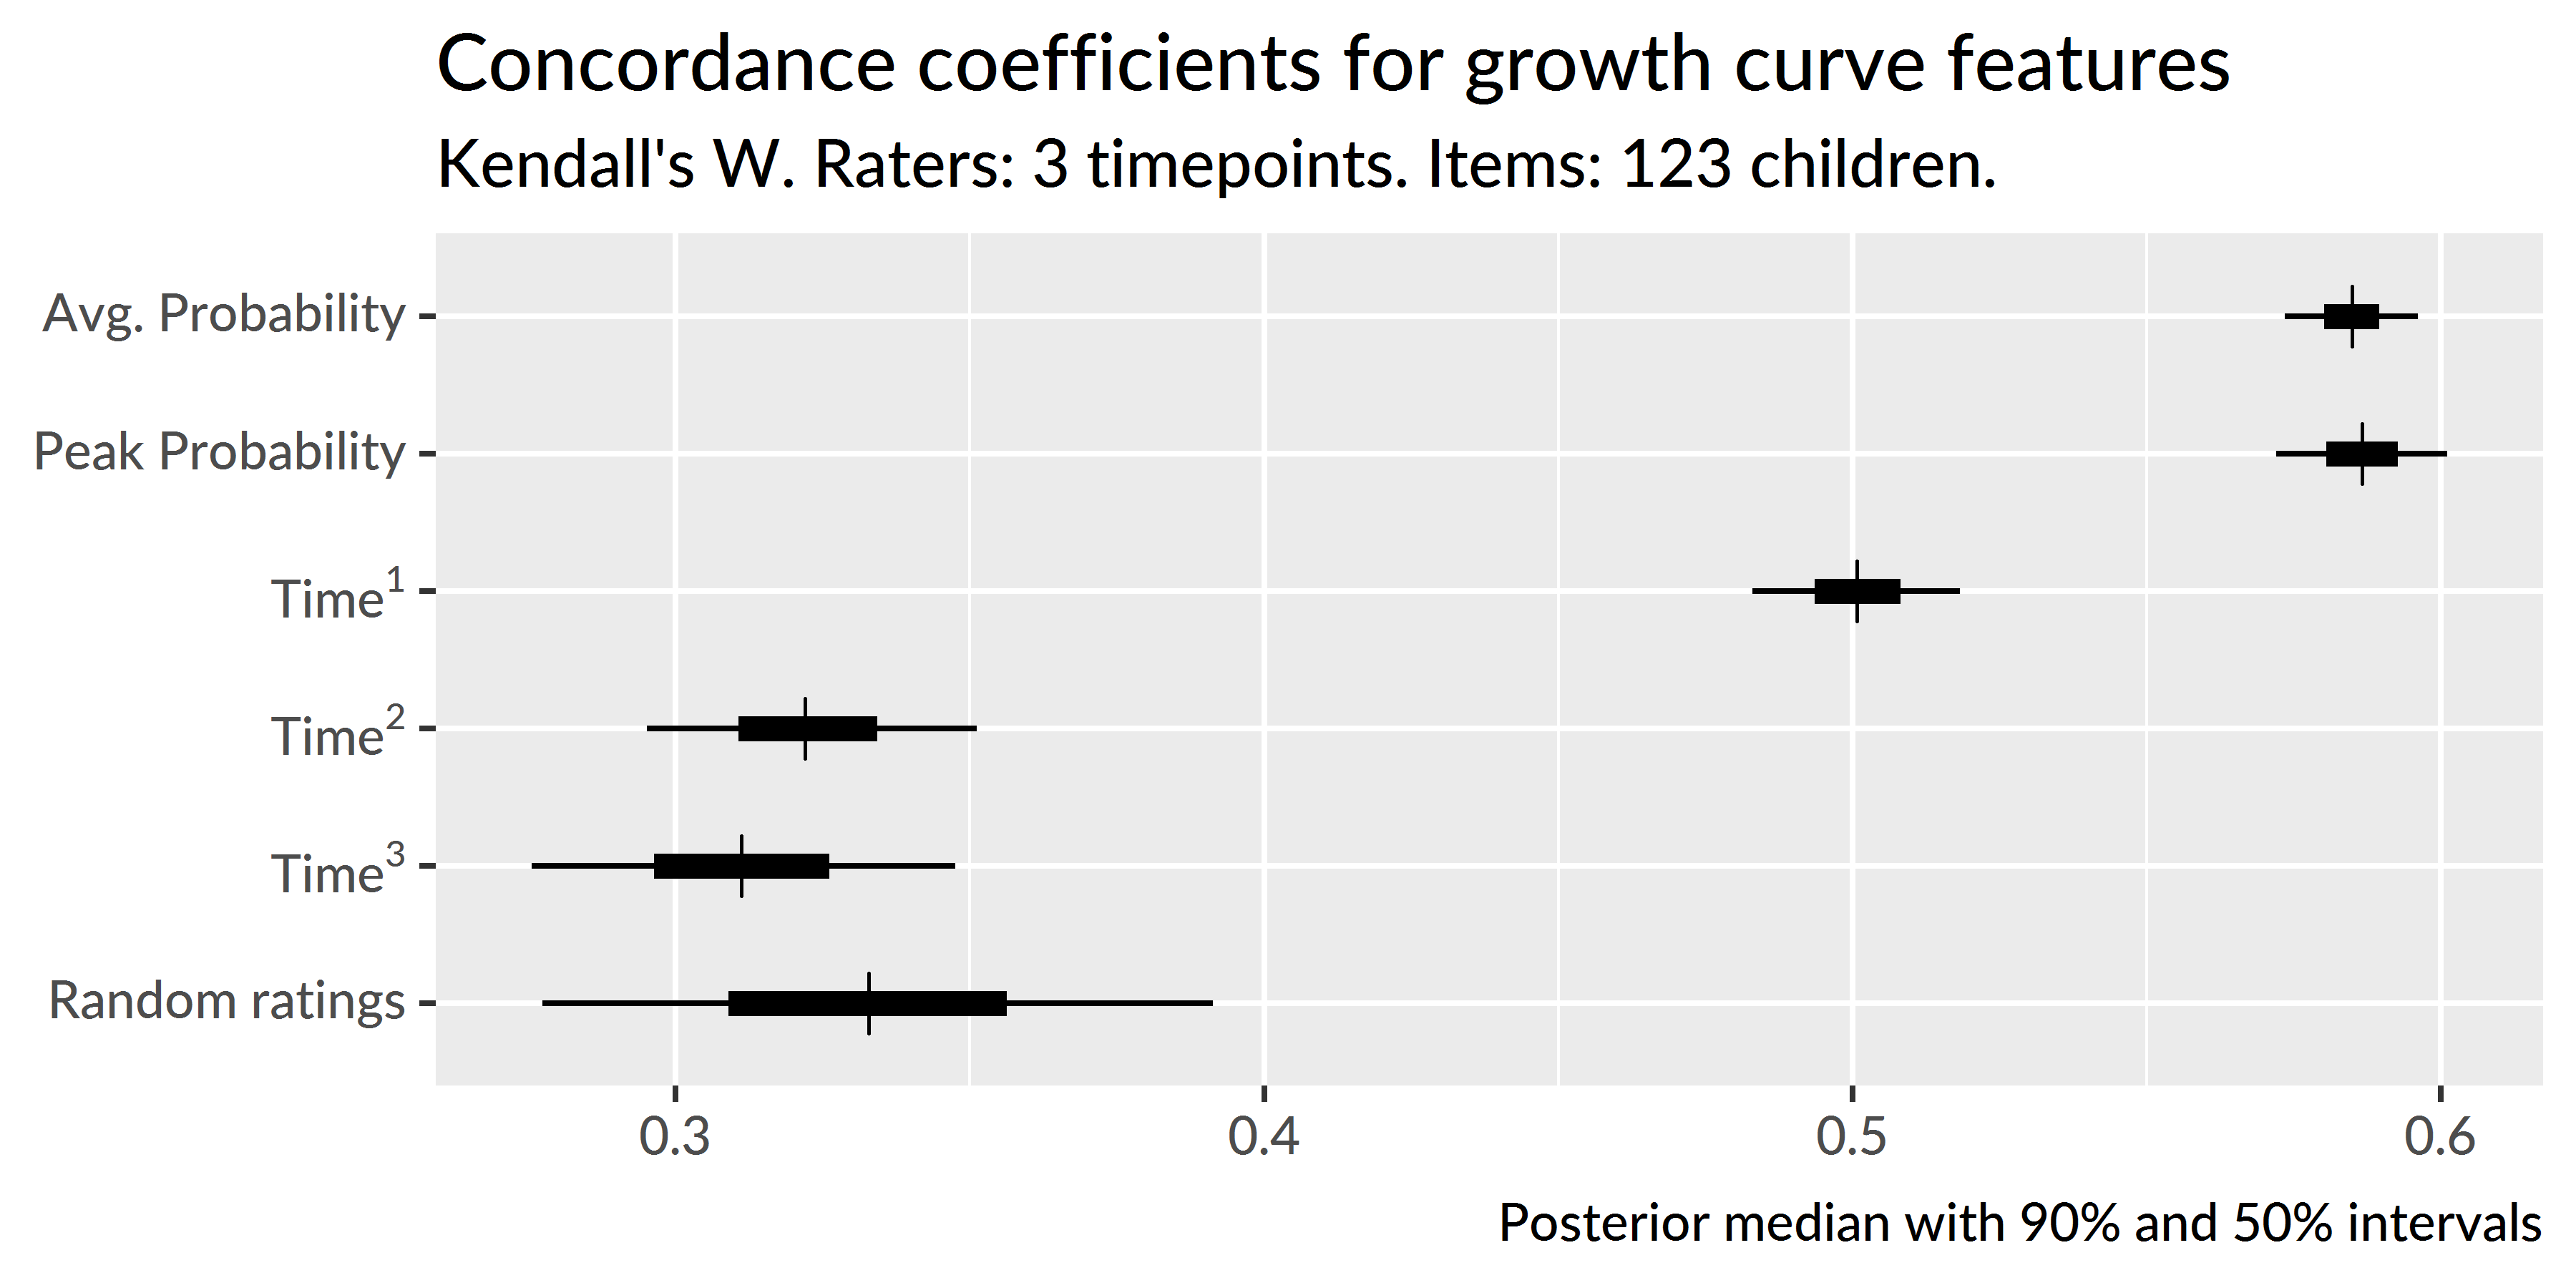 Uncertainty intervals for the Kendall’s coefficient of concordance. Random ratings provide a baseline of null W statistics. The peak, intercept and linear time features are decisively non-null, indicating a significant degree of correspondence in children’s relative word recognition reliability and efficiency over the three years of the study.